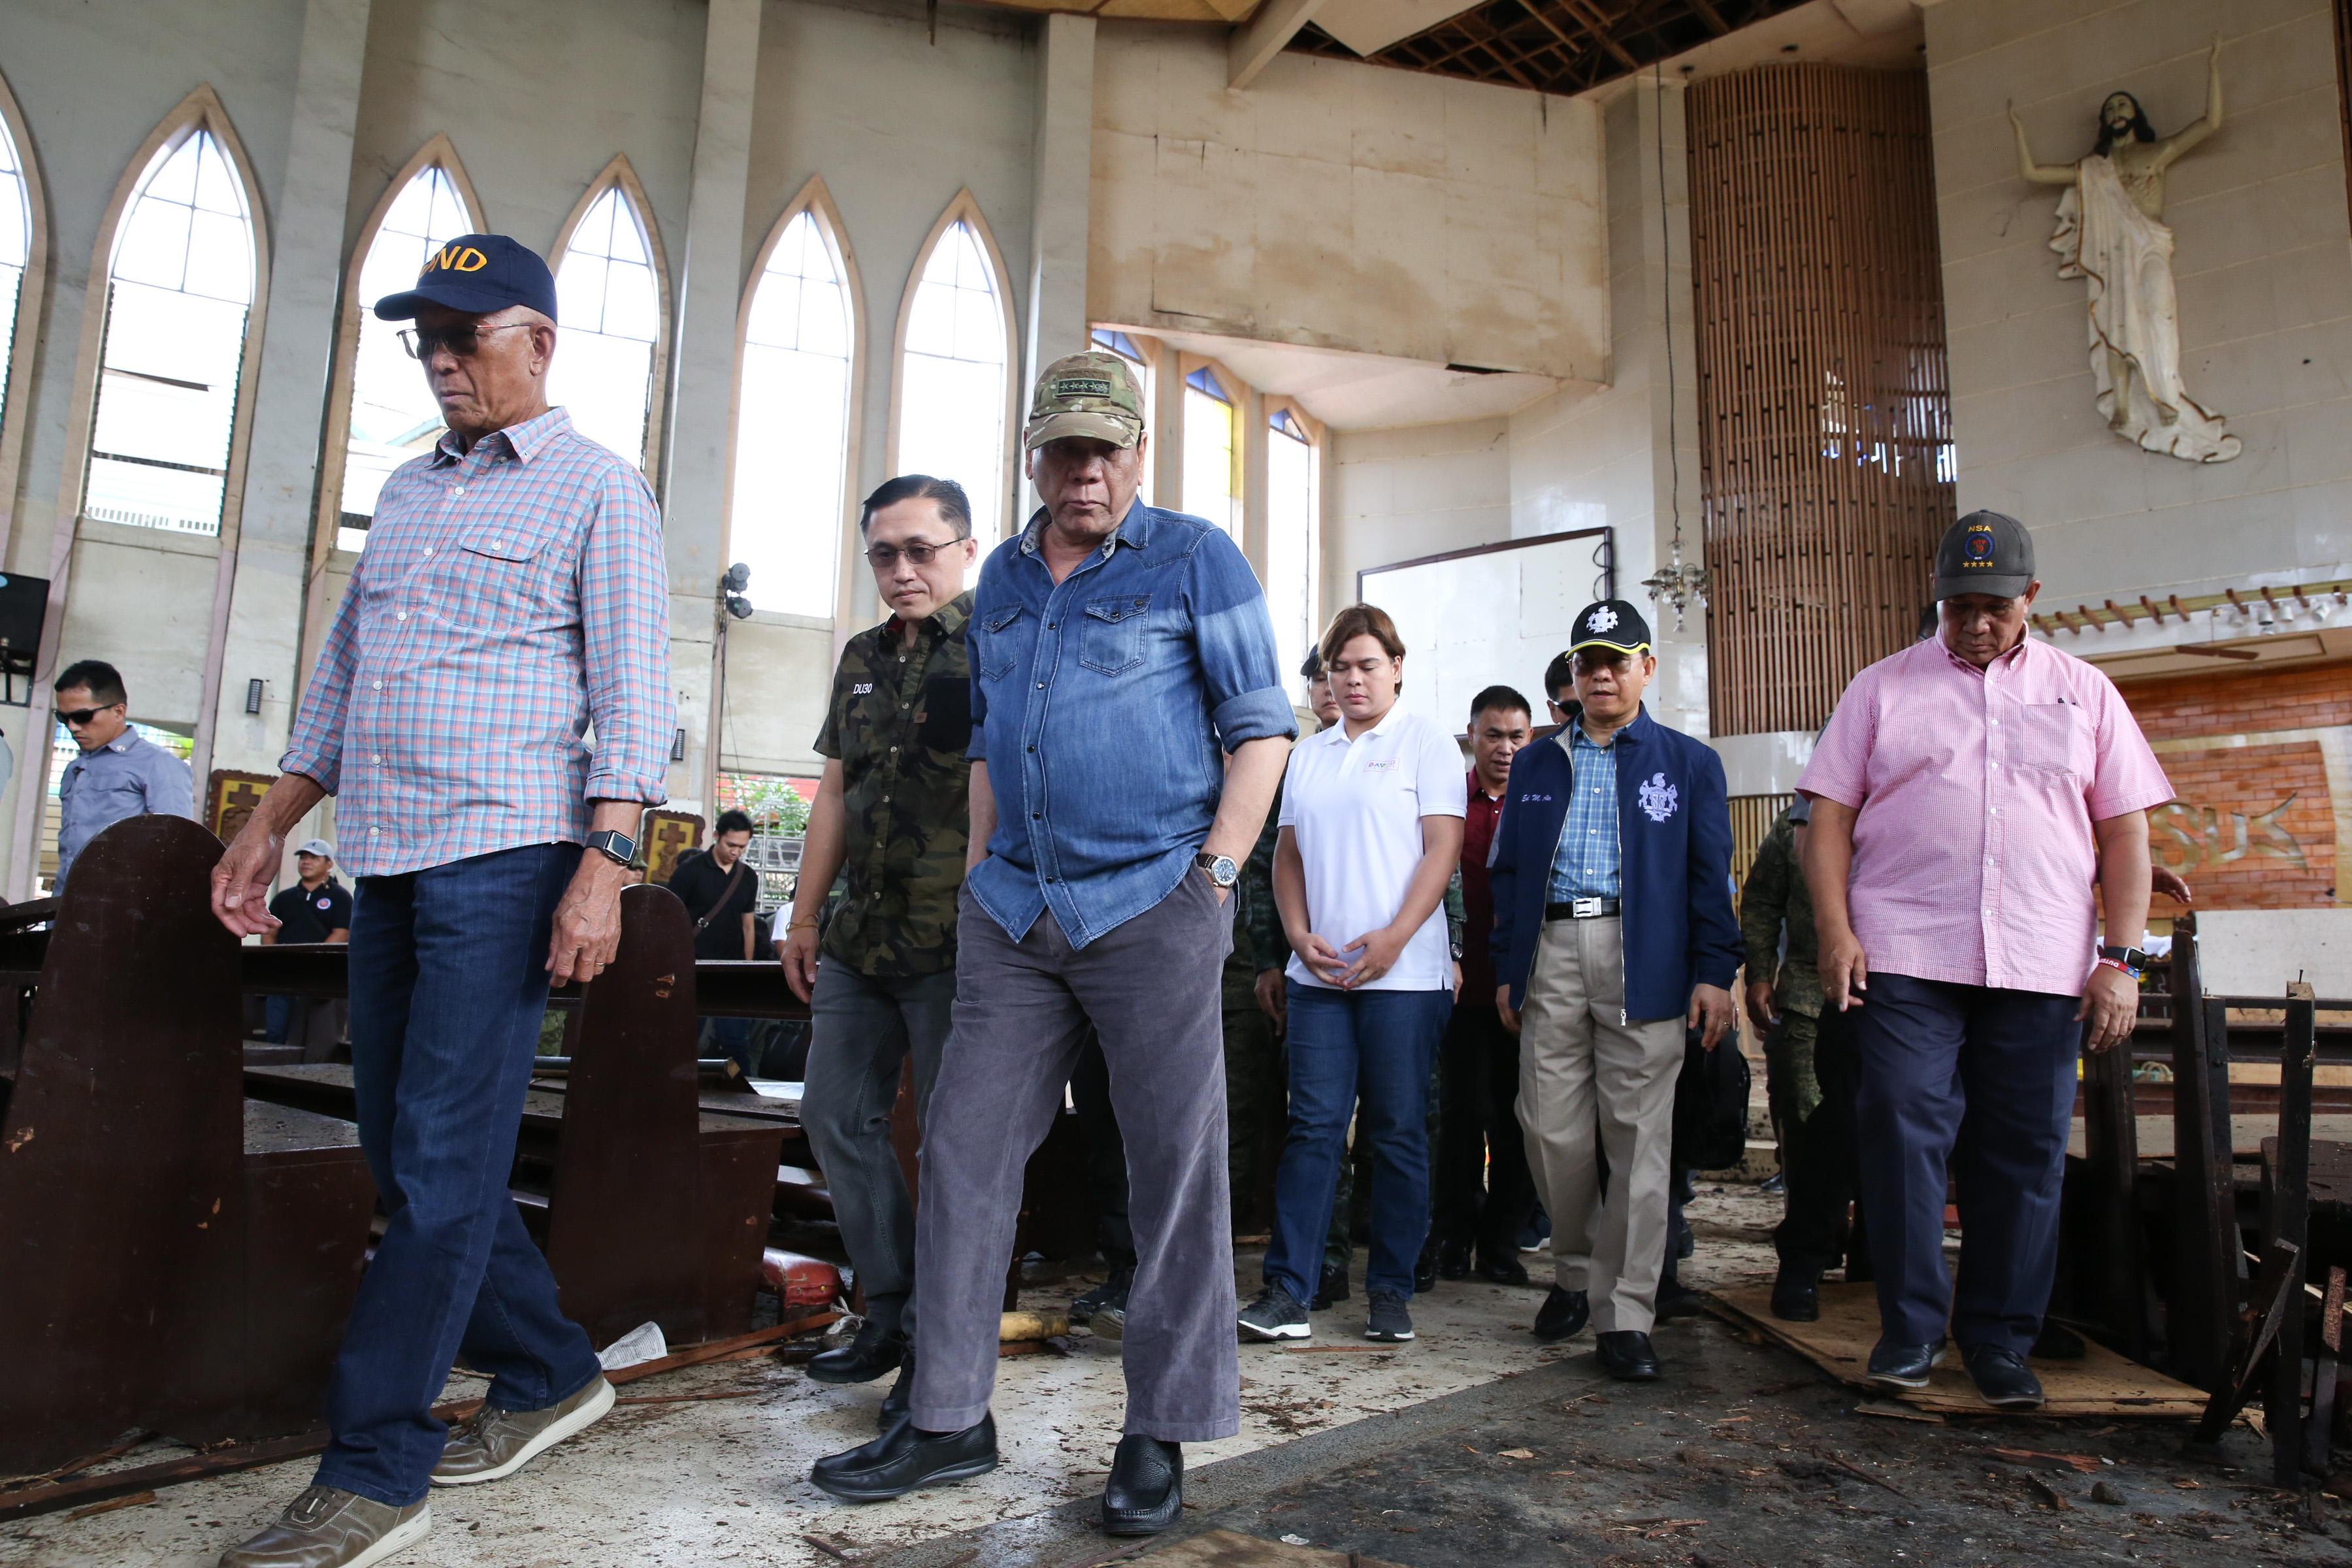 BLAST SITE. President Rodrigo Duterte conducts an inspection inside the Cathedral of Our Lady of Mount Carmel in Jolo, Sulu, on January 28, 2019. Malacañang photo   